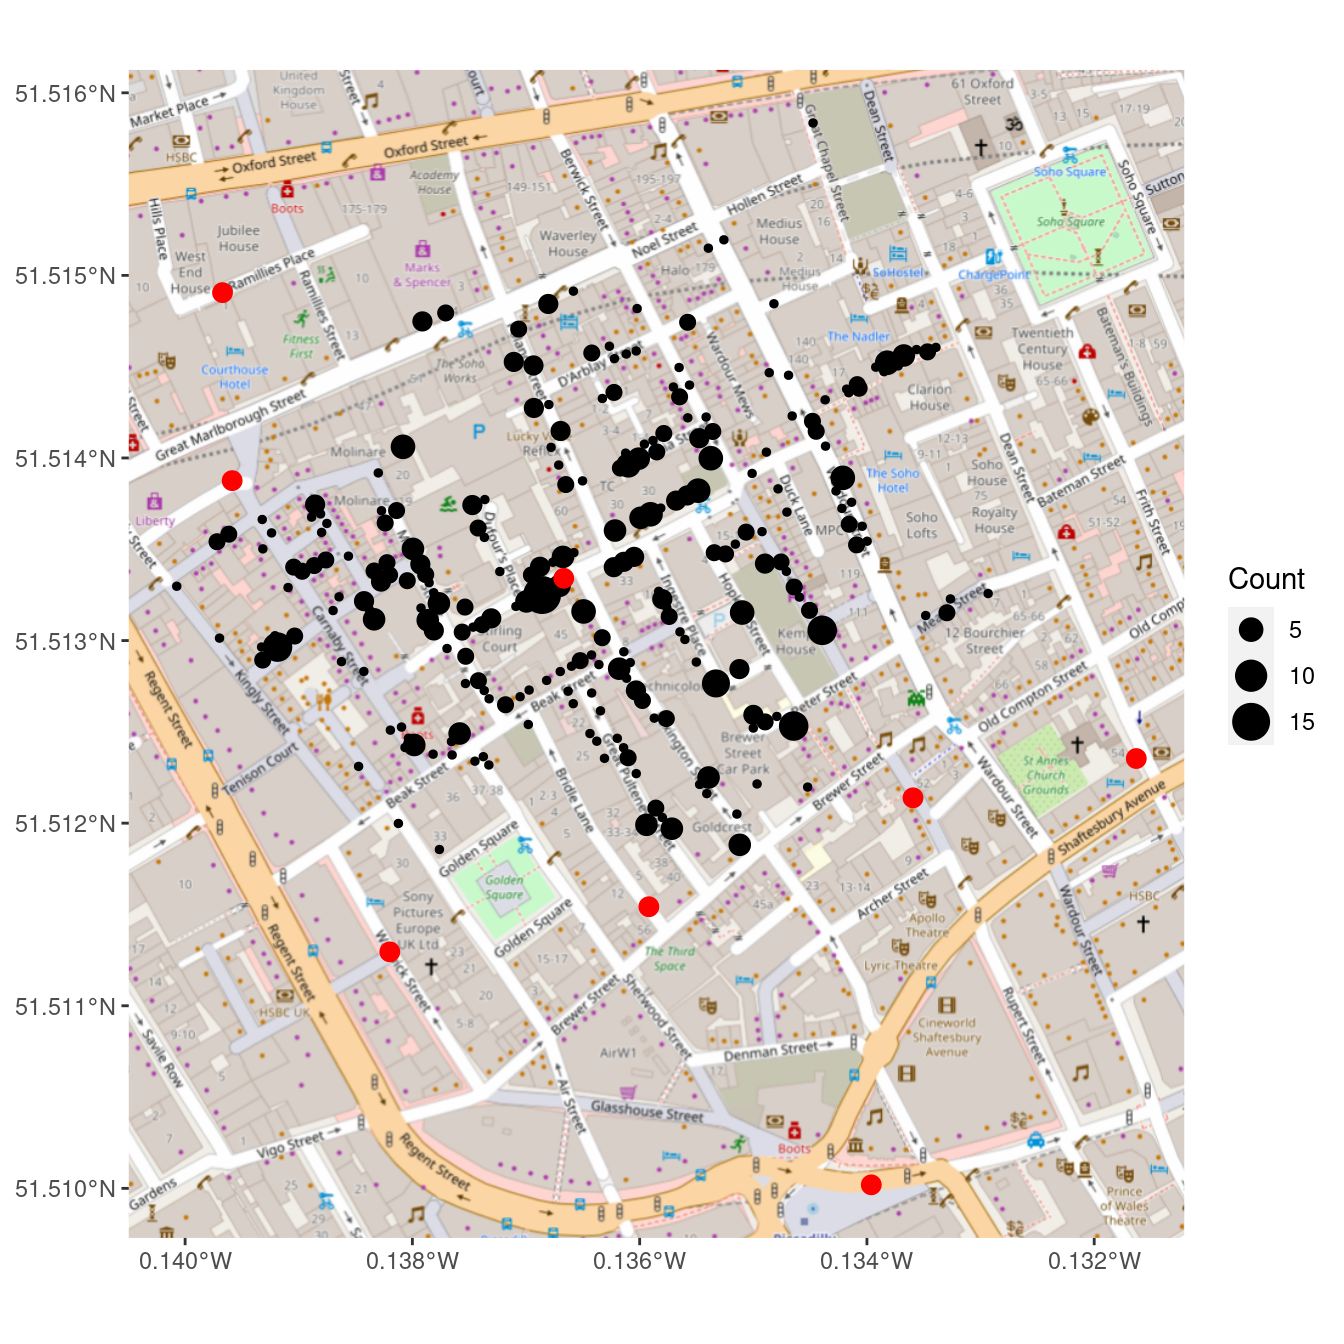 Recreation of John Snow's original map of the 1854 cholera outbreak. The size of each black dot is proportional to the number of people who died from cholera at that location. The red dots indicate the location of public water pumps. The strong clustering of deaths around the water pump on Broad(wick) Street suggests that perhaps the cholera was spread through water obtained at that pump.